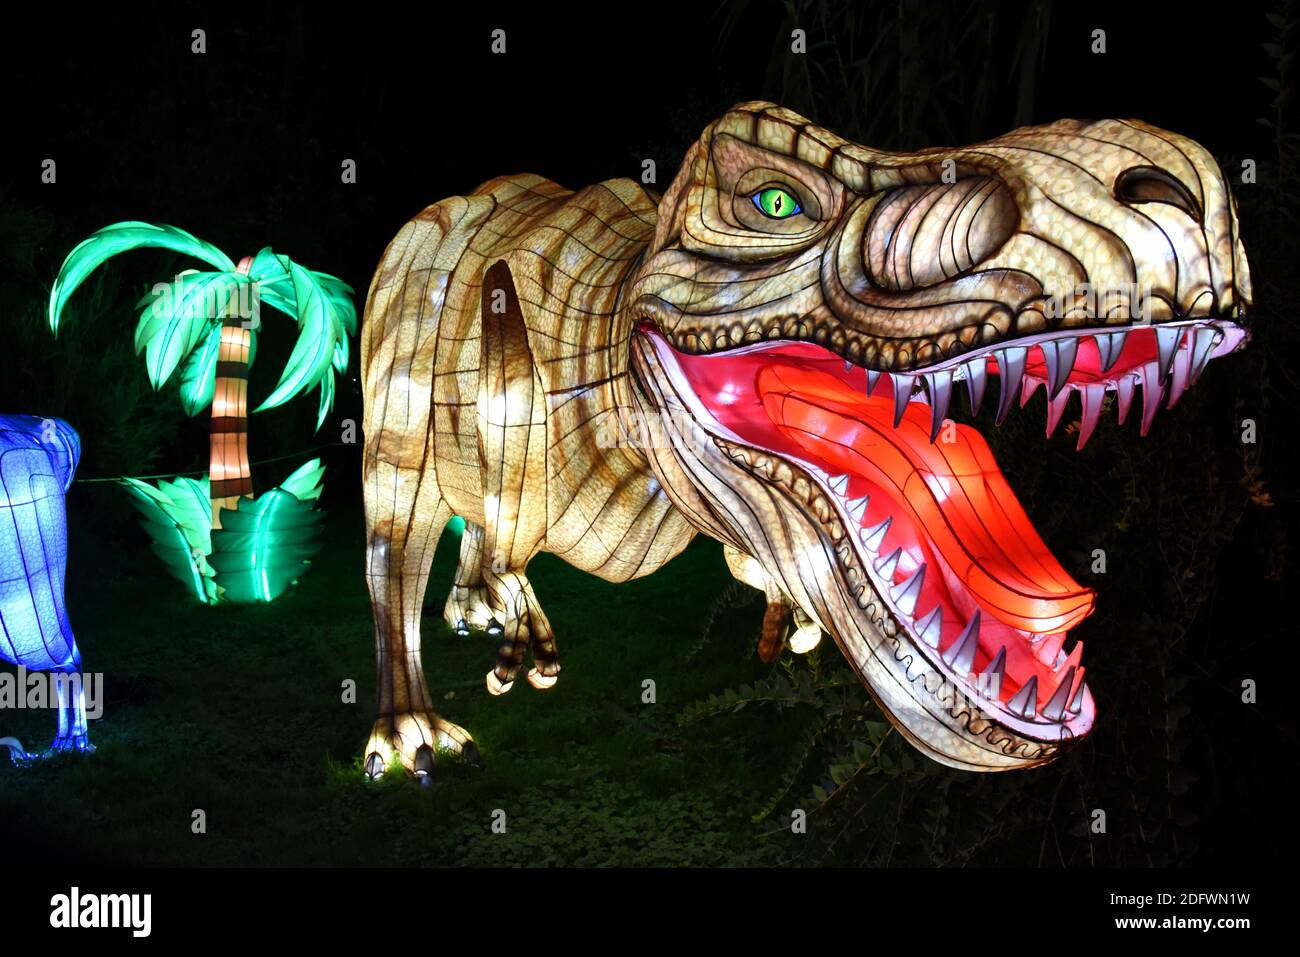 A picture taken on November 29, 2018 shows giant animal shaped light structures displayed at the Jardin des Plantes 'botanical garden' Zoo in Paris, as part of the Light Festival exhibition entitled 'Espèces en voie d'illumination' which runs from November 16, 2018 to January 15, 2019. Photo by Alain Apaydin/ABACAPRESS.COM Stock Photo